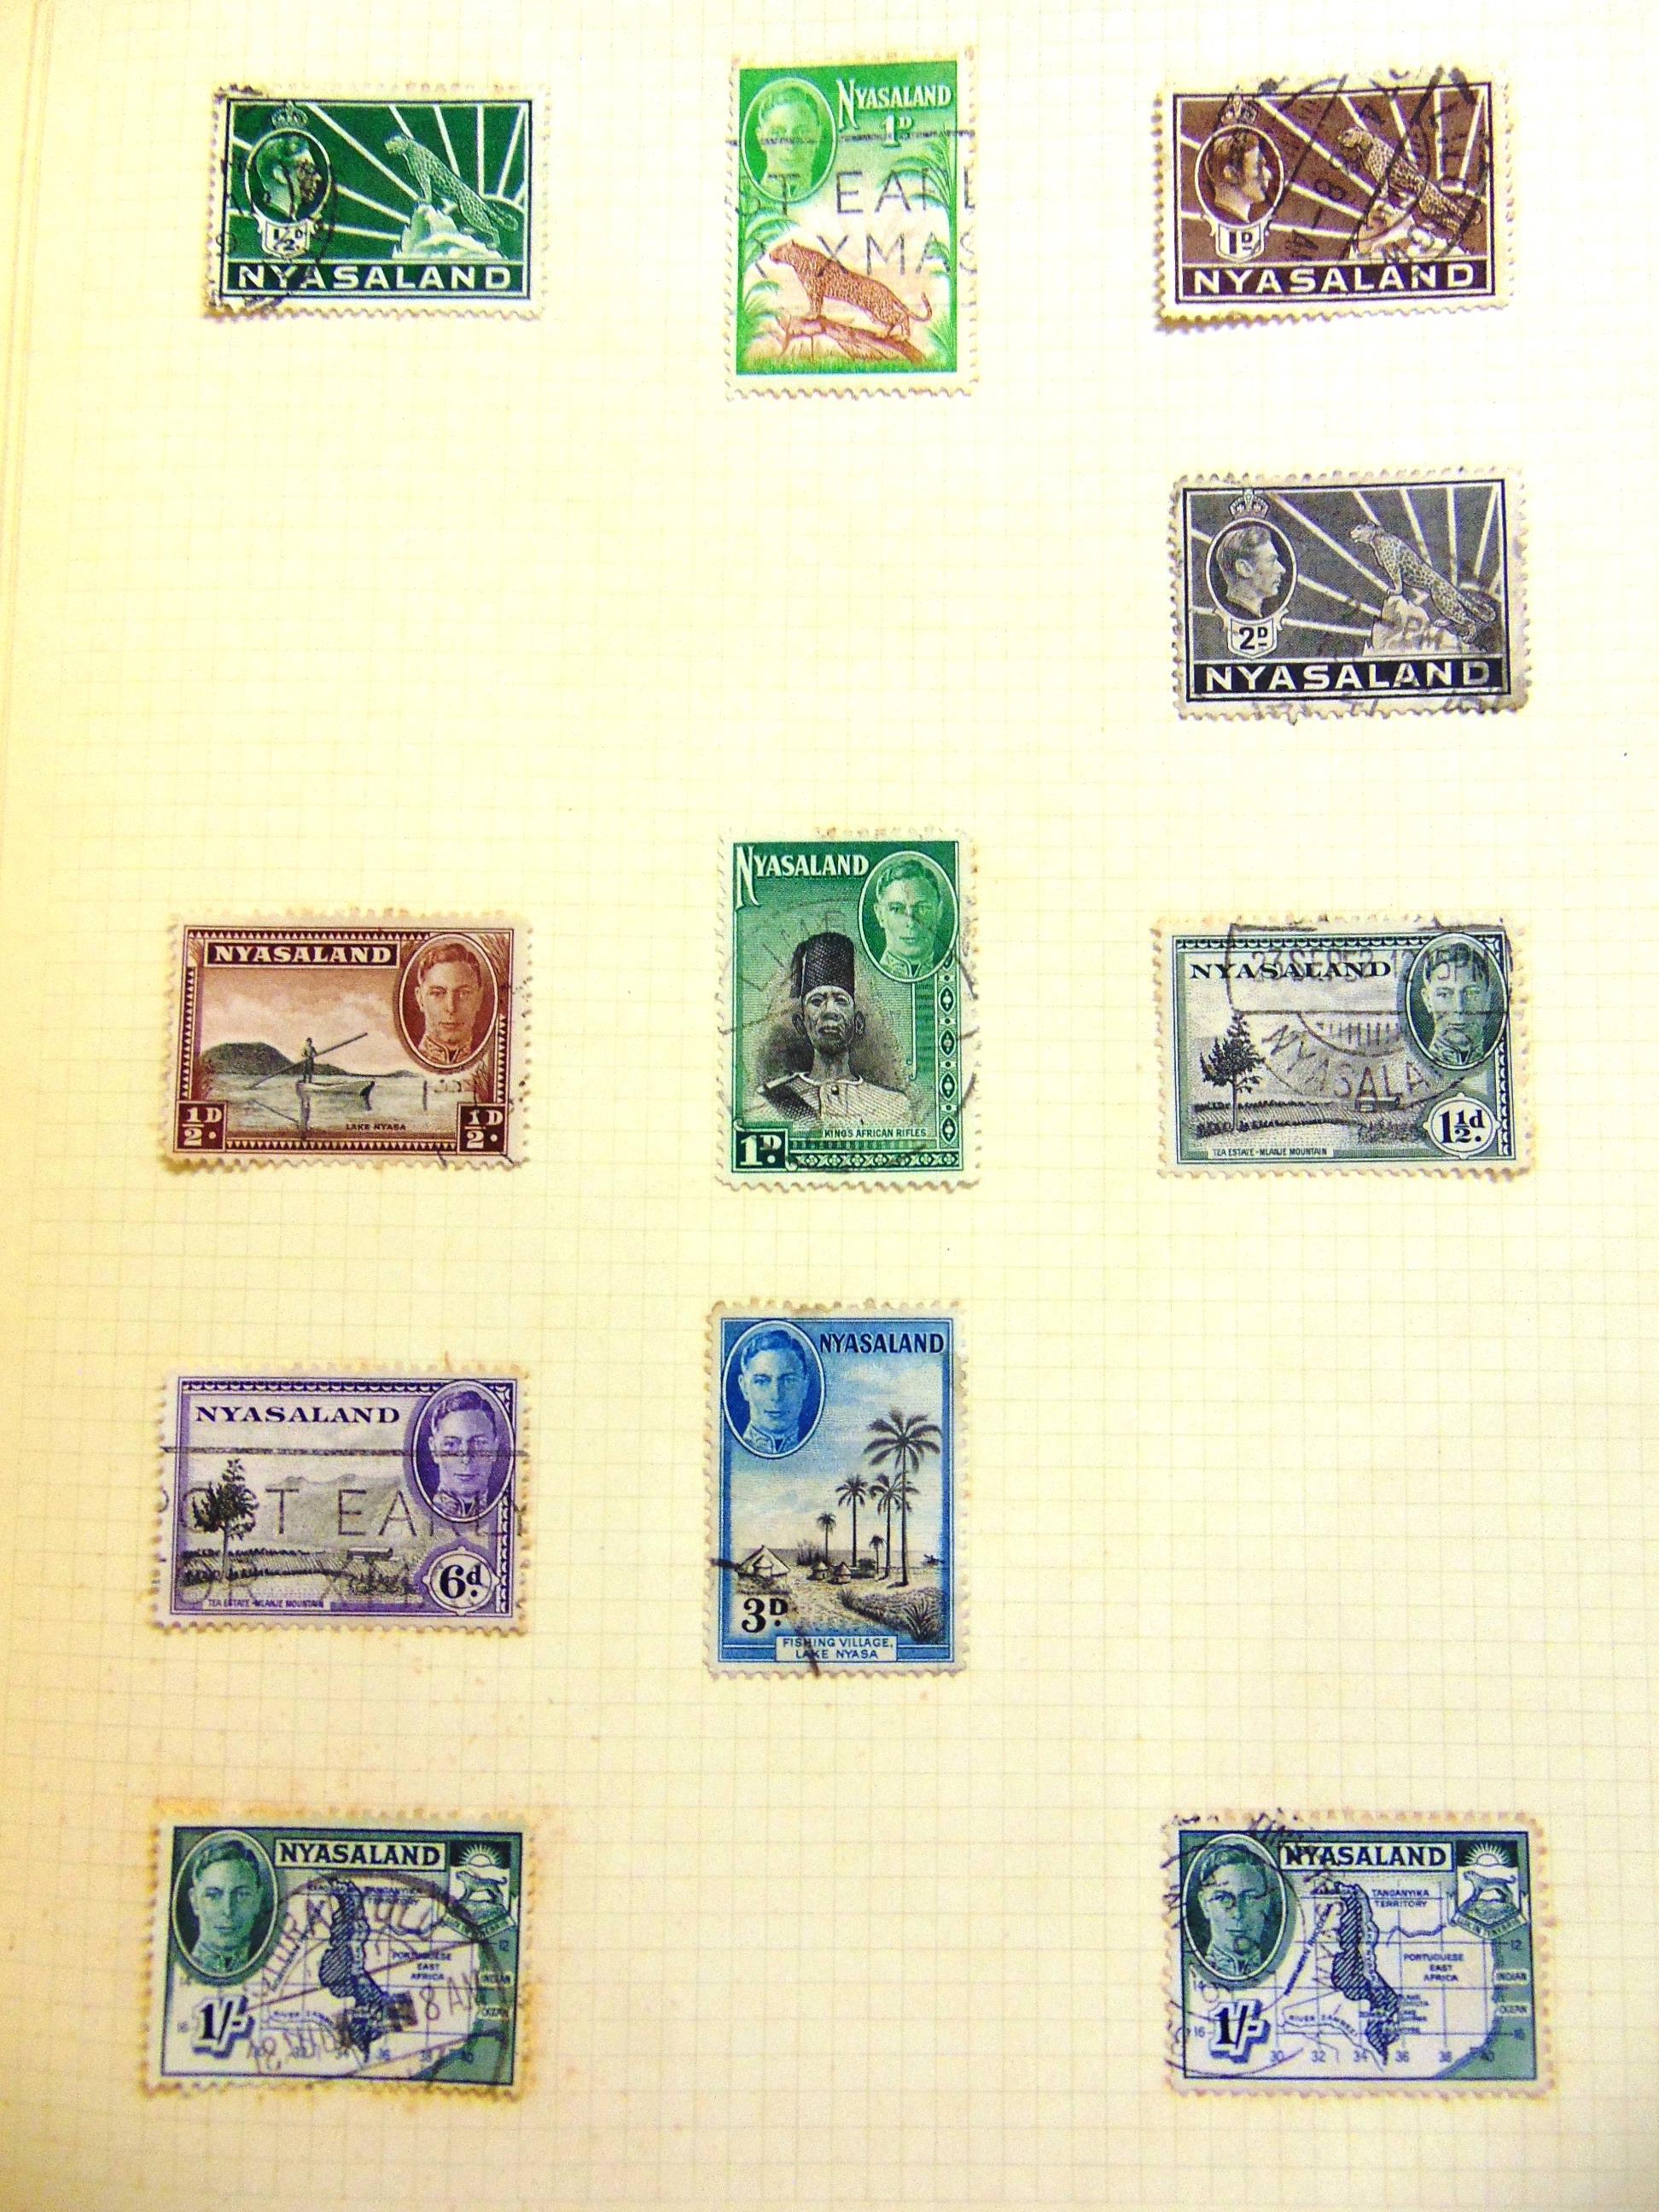 STAMPS - A PART-WORLD COLLECTION with noted Bulgaria, including also Australia, Canada and other - Image 4 of 6